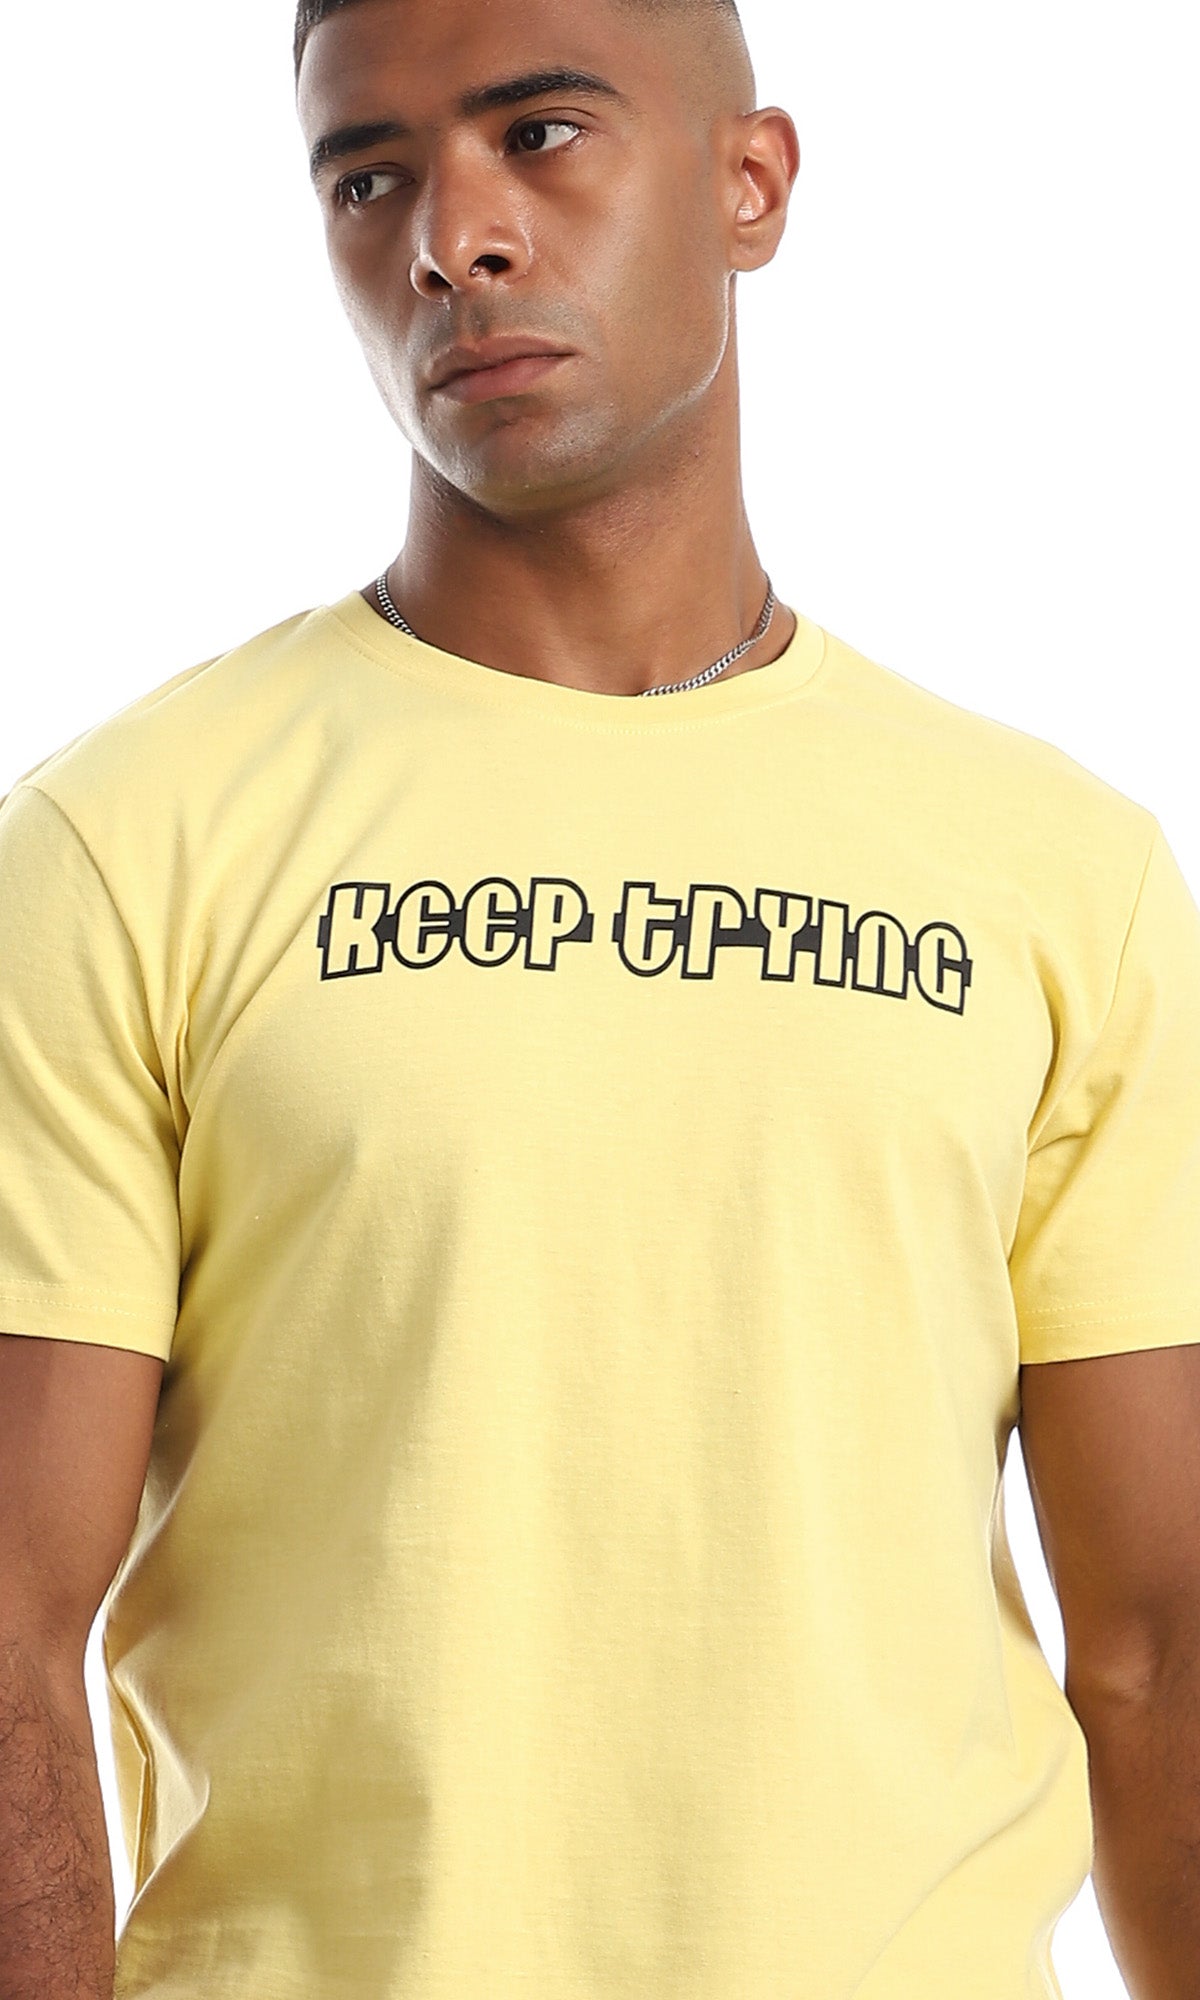 97737 "Keep Trying" Printed Cotton T-Shirt - Yellow